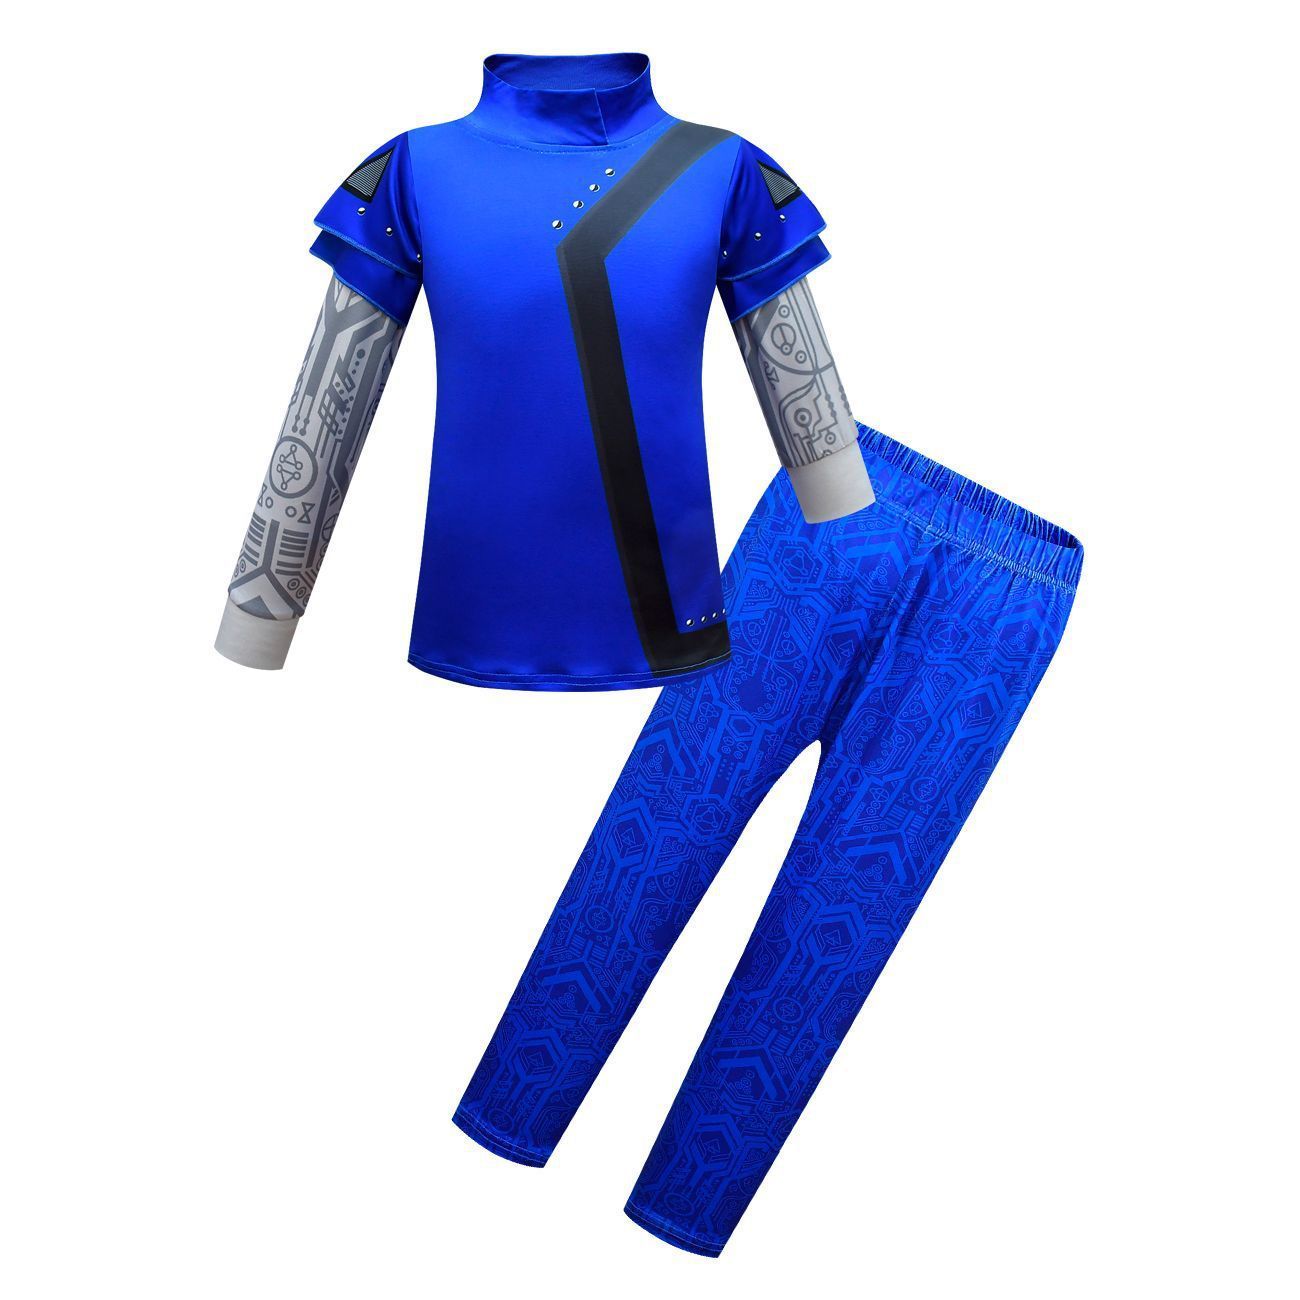 College Zombies 3 Blue Cosplay two piece set Costume Bodysuit Outfits for kids